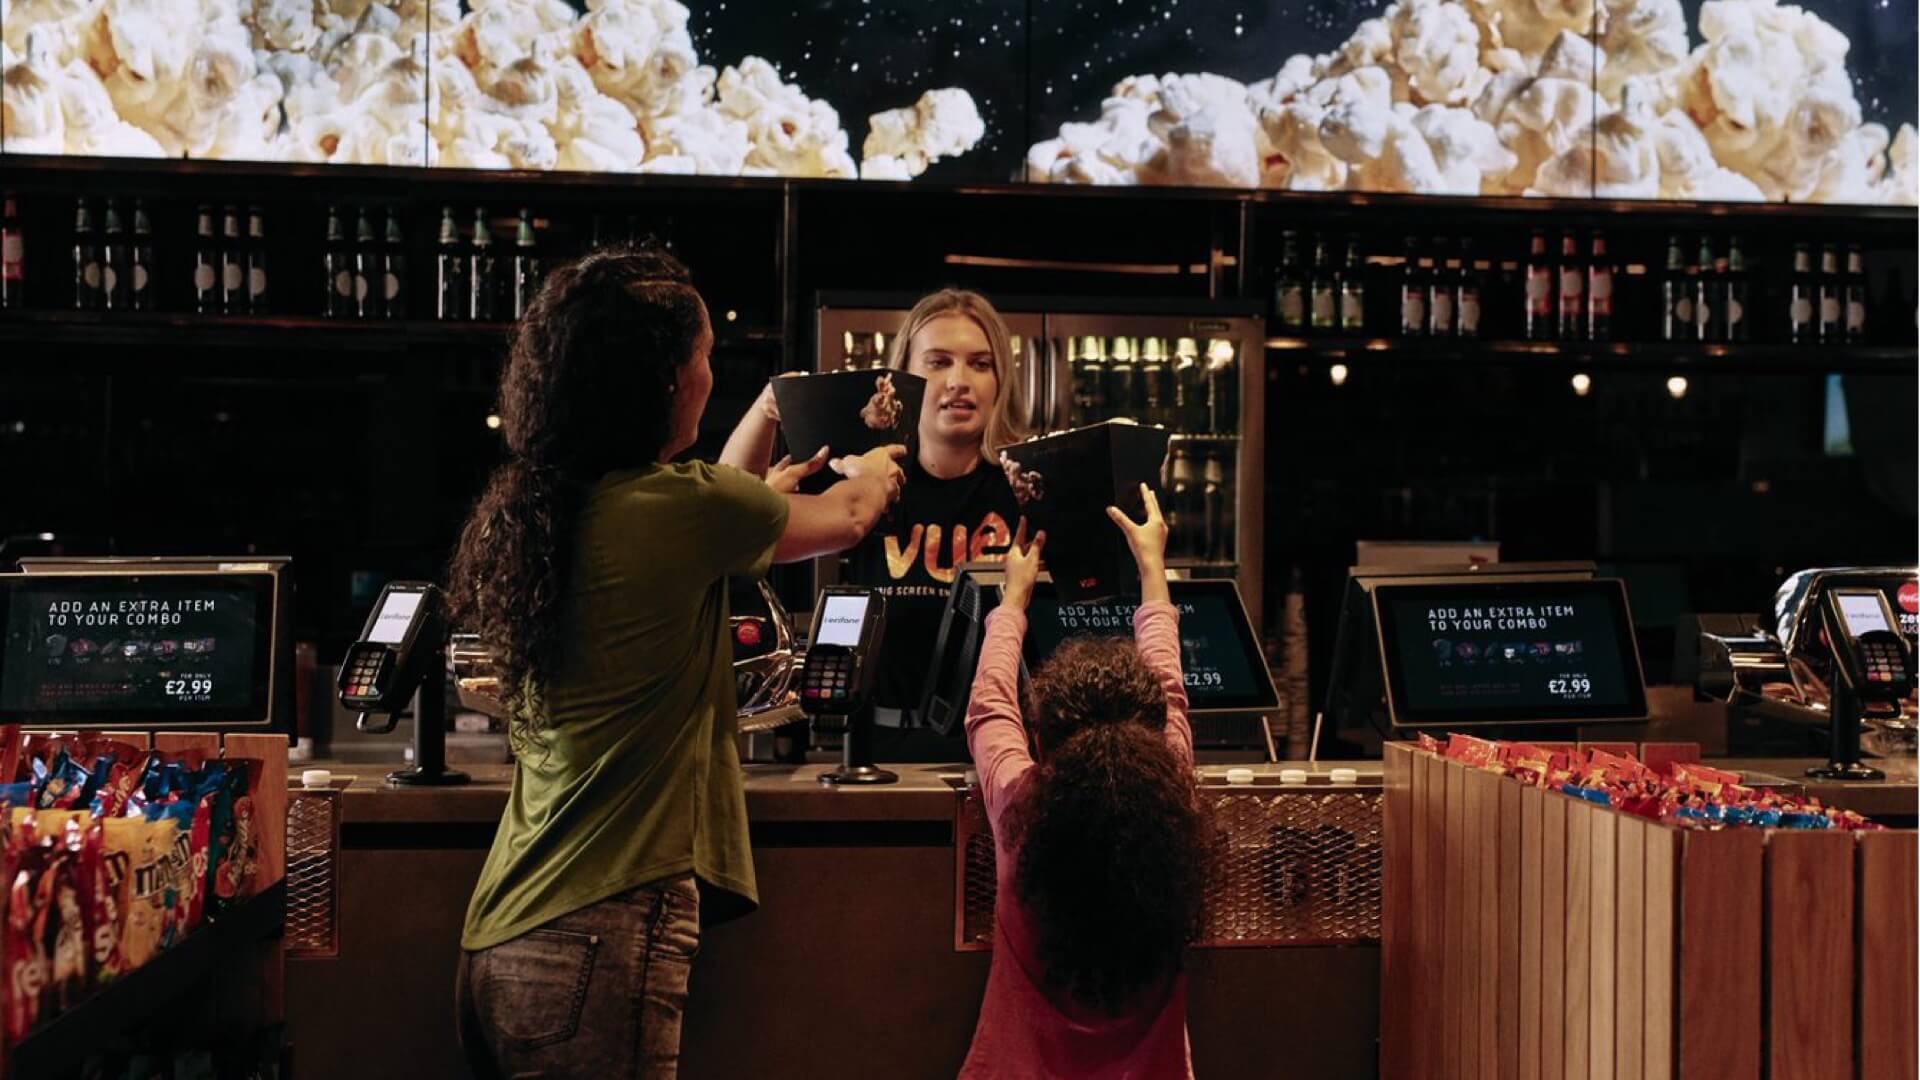 customers paying for popcorn at a cinema